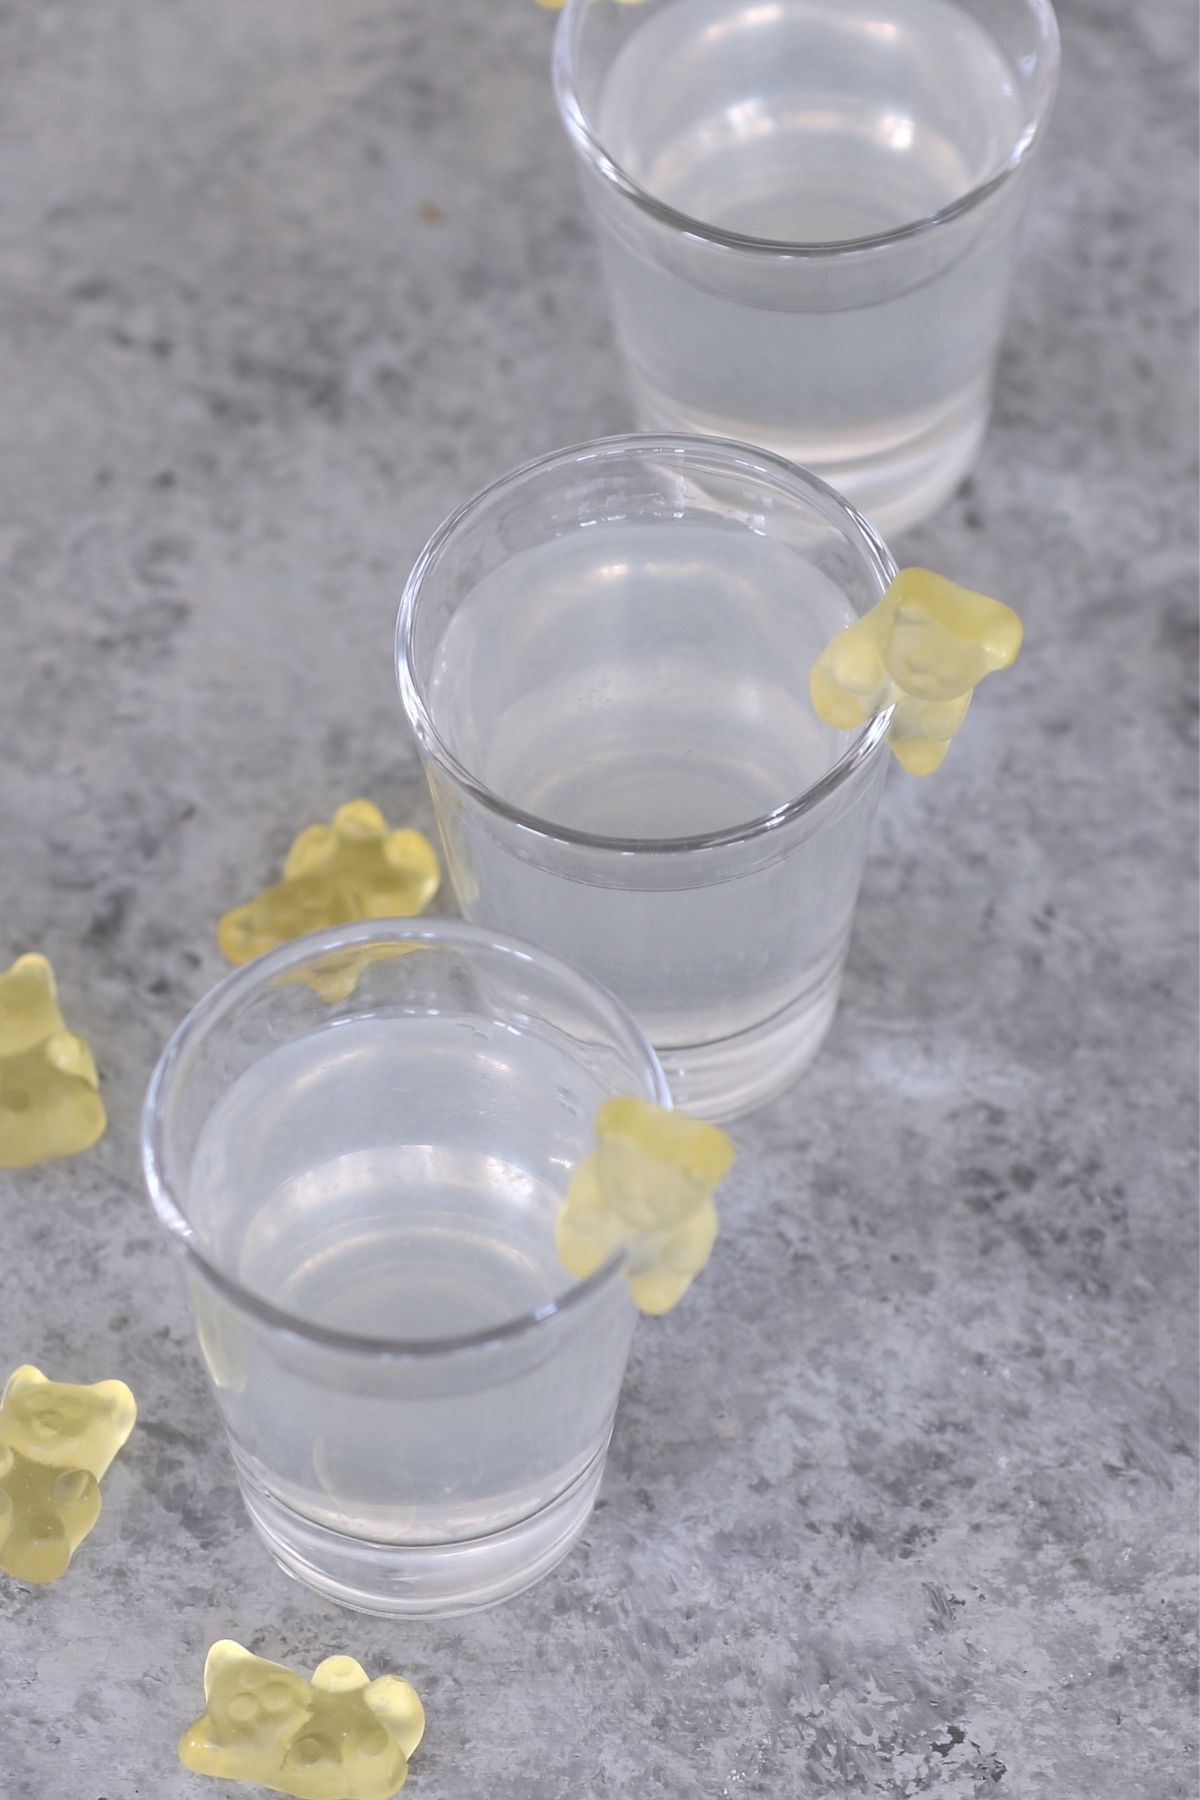 The White Gummy Bear Shot looks and sounds cute, but still packs a punch with its base of raspberry vodka and peach liqueur. You can make these shots for bachelorette parties or any other event where you need something fun and whimsical.